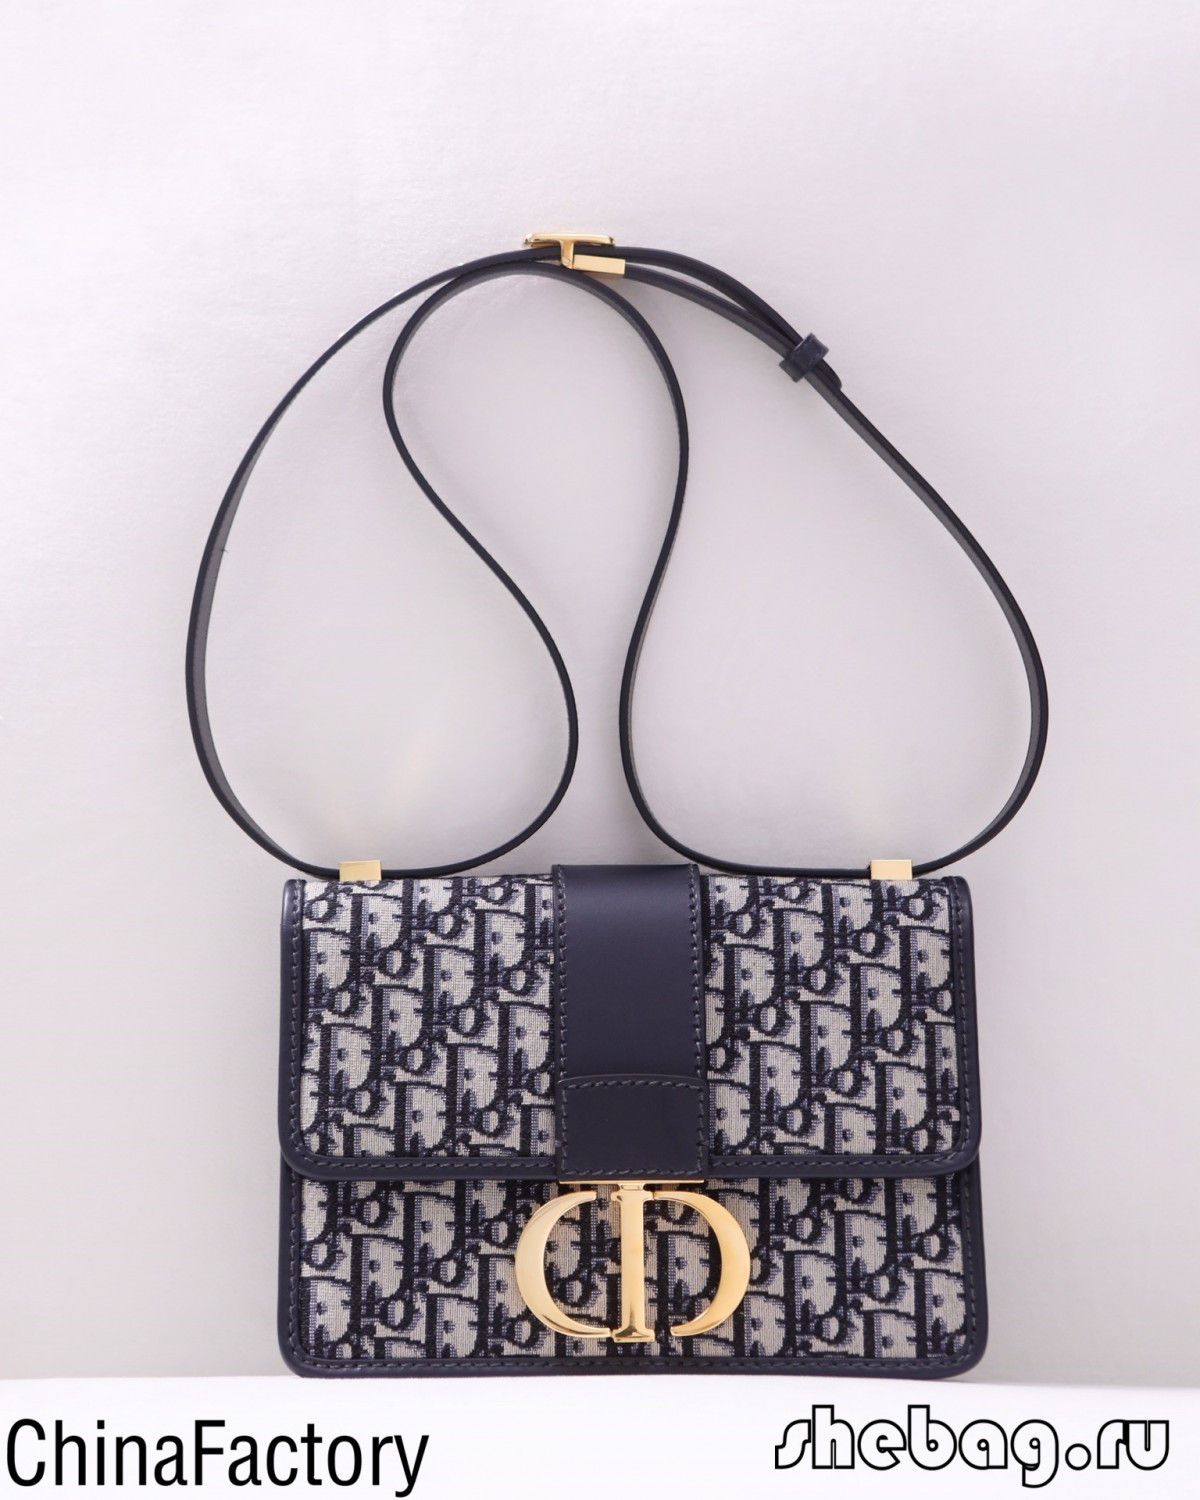 How many aaa replica bags suppliers in China?(2022 Latest)-Best Quality Fake designer Bag Review, Replica designer bag ru